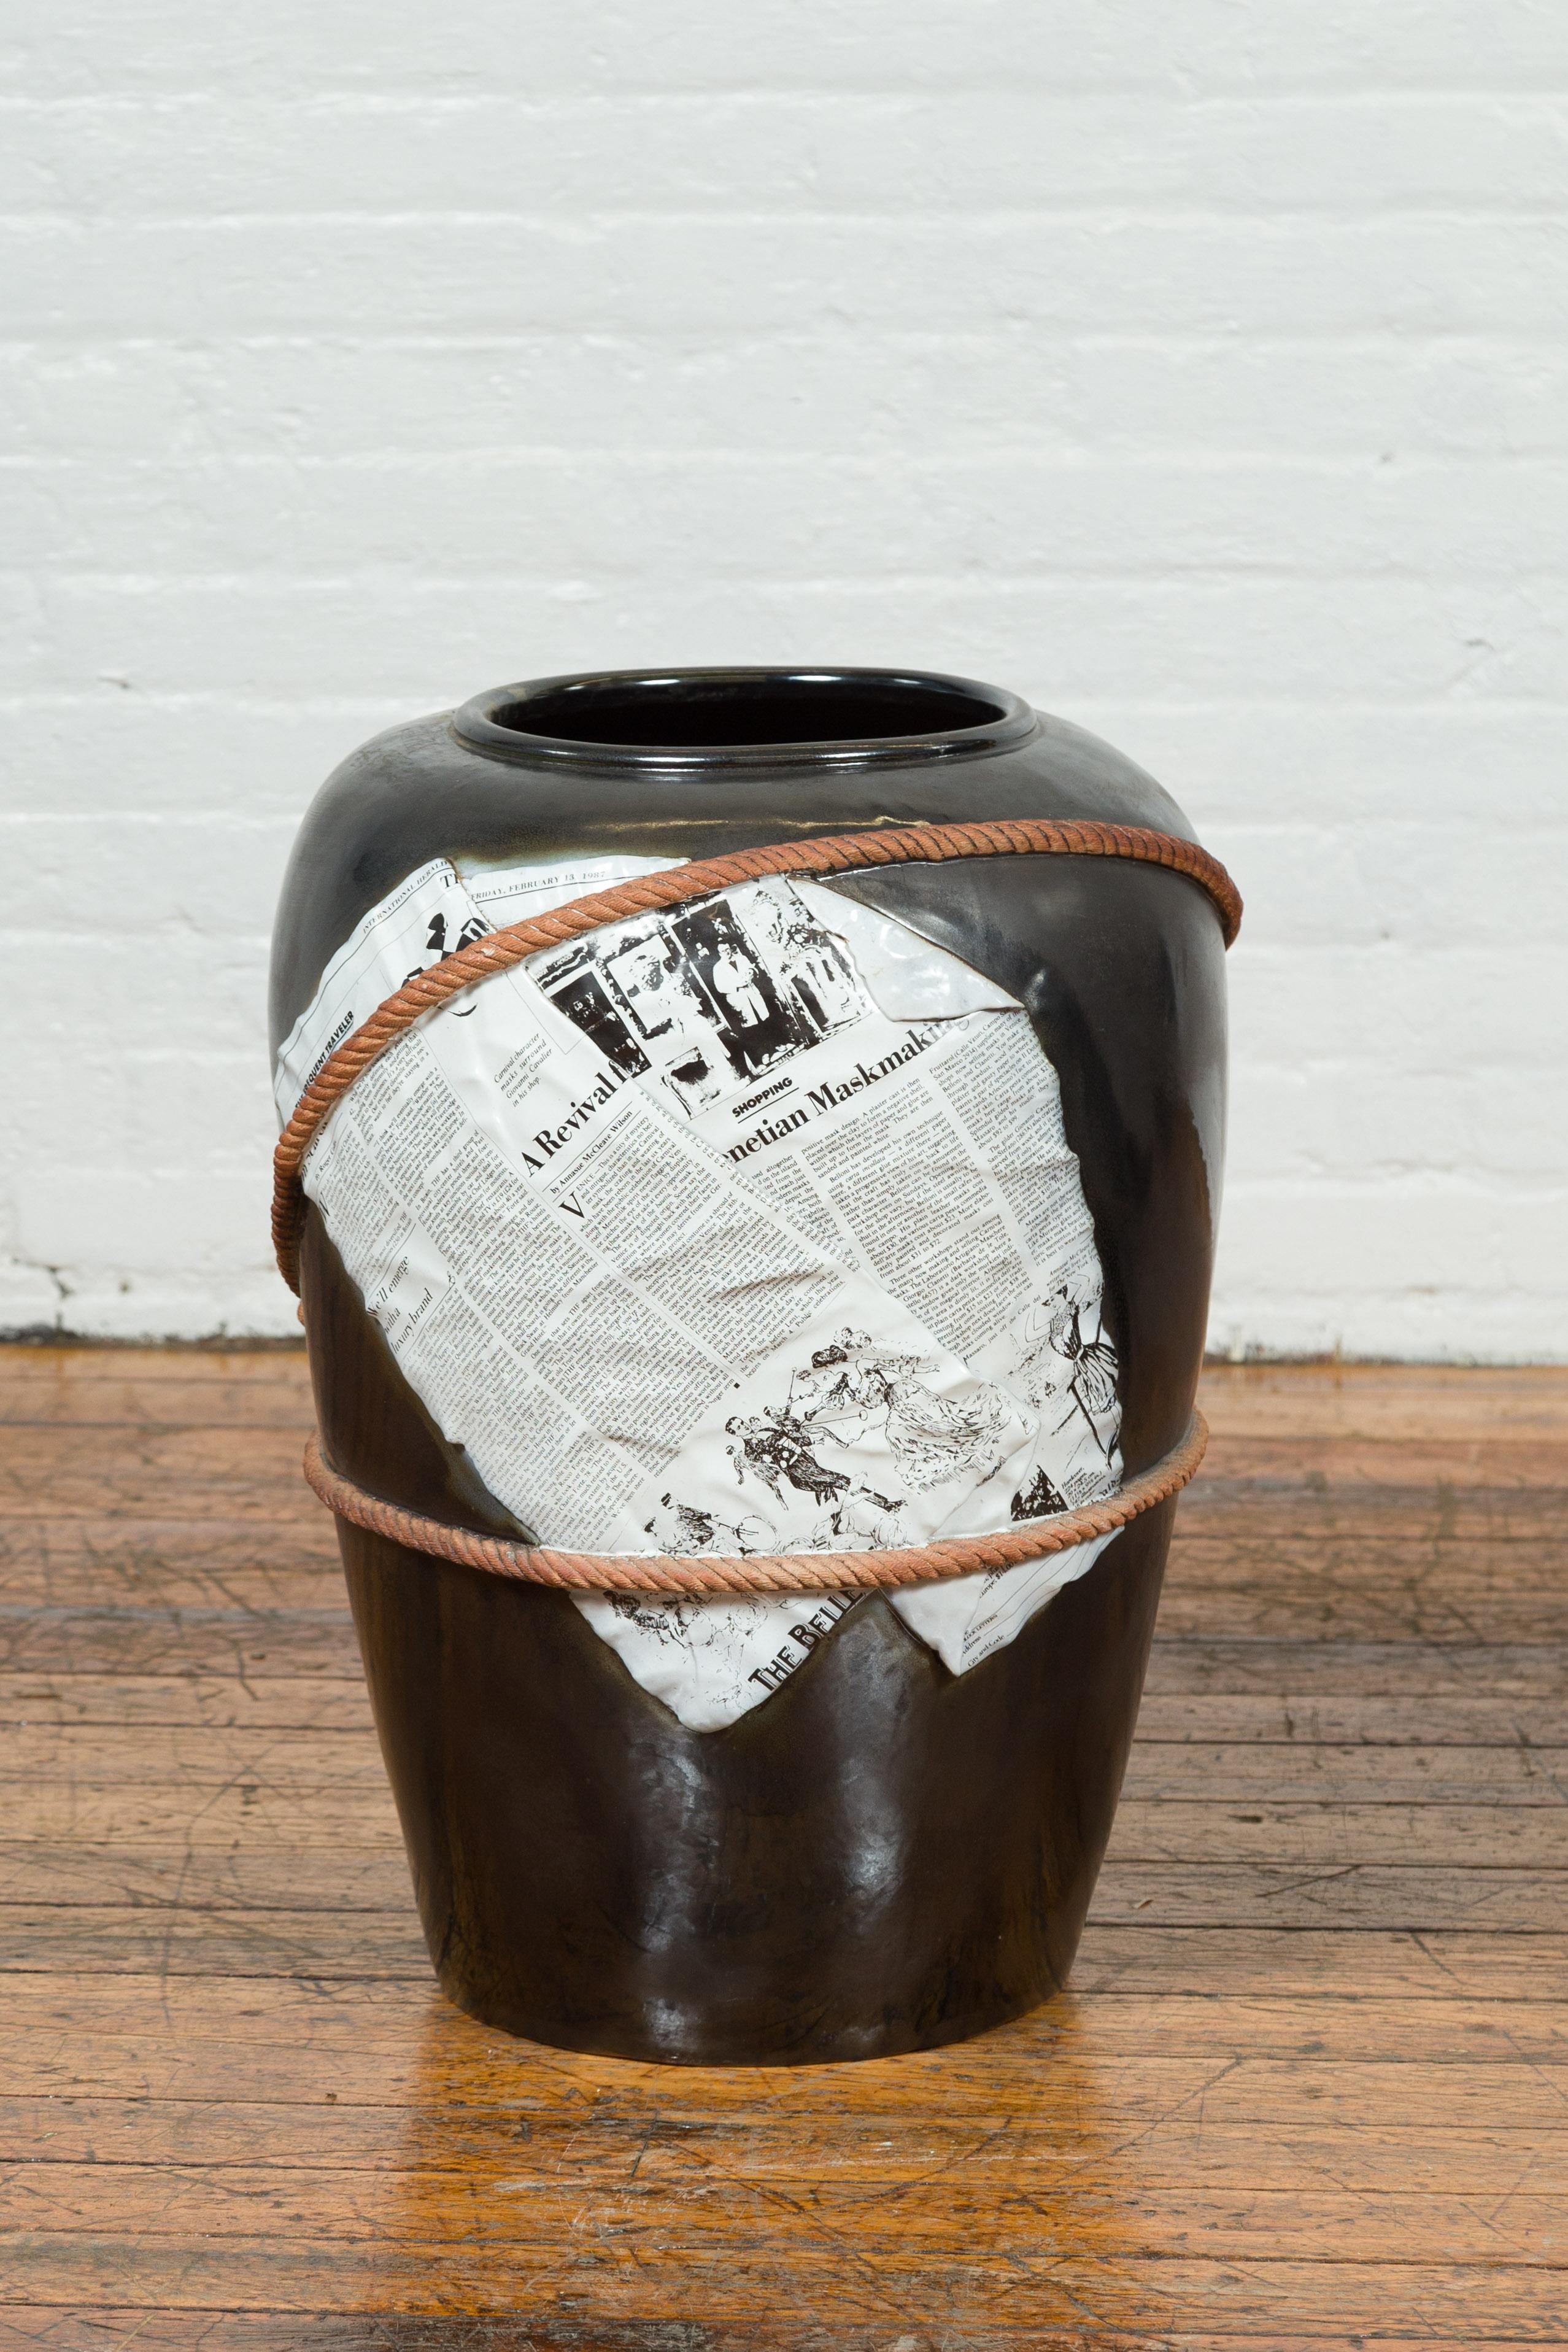 Large Thai Exterior Flower Vase with Black Patina, Rope and Newspaper Motifs In Good Condition For Sale In Yonkers, NY